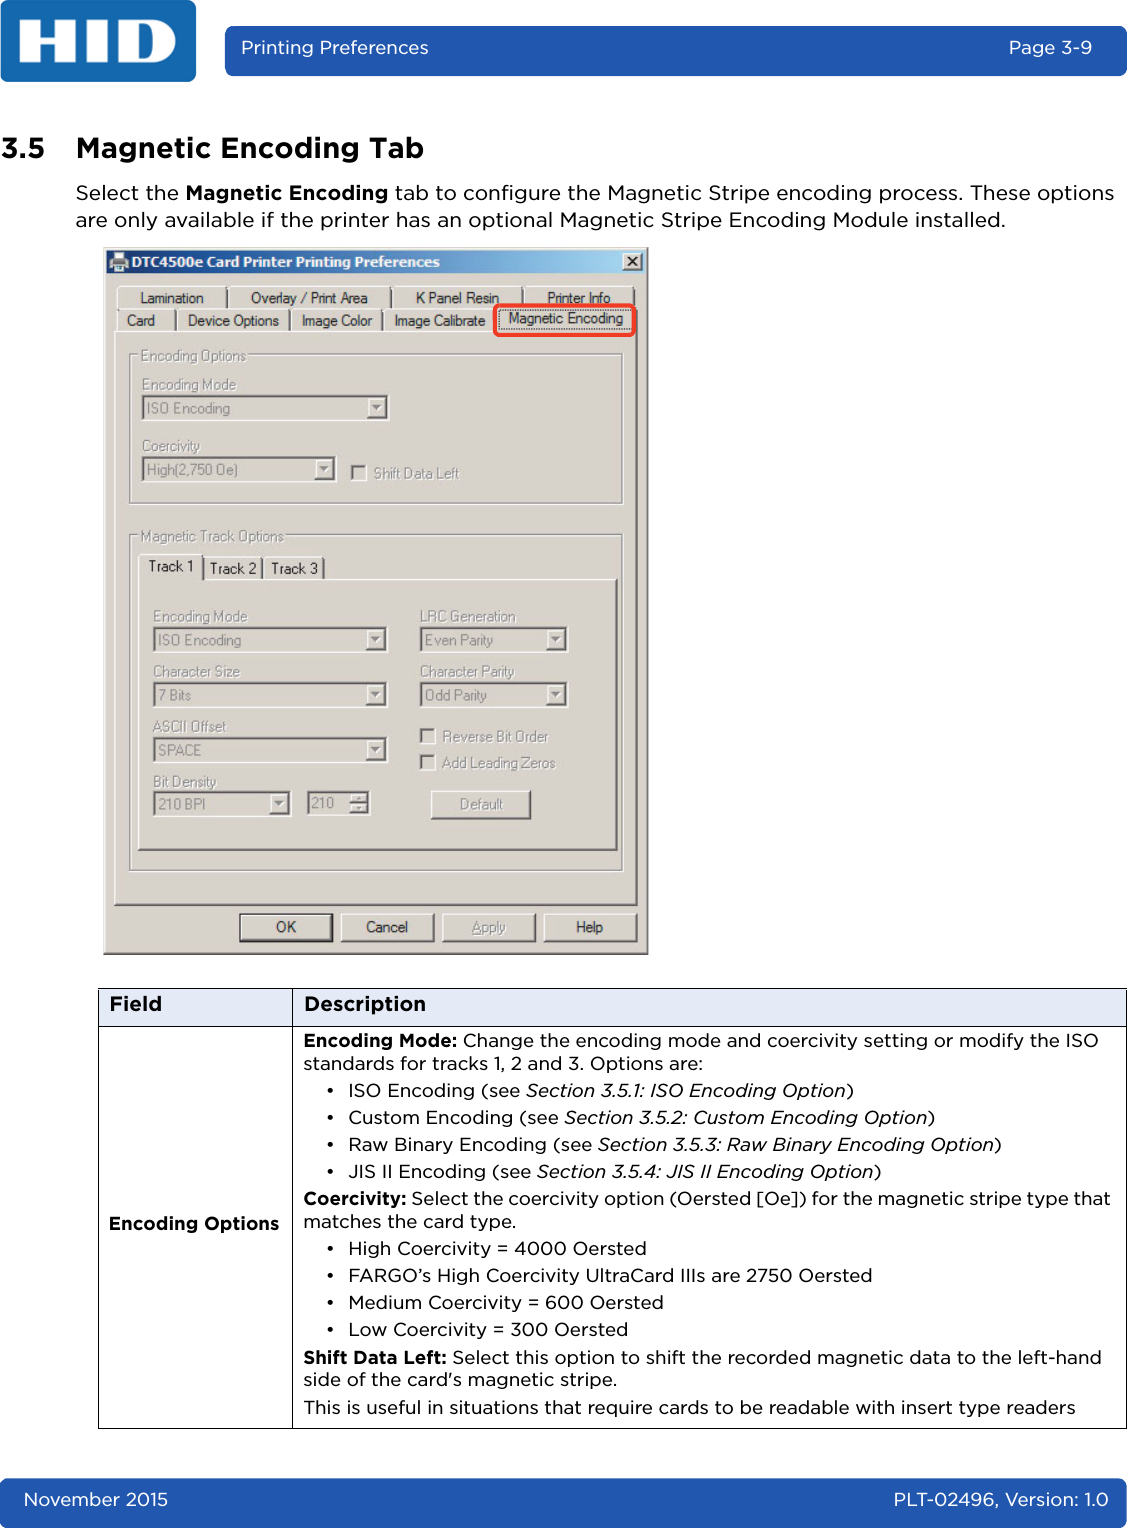 November 2015 PLT-02496, Version: 1.0Printing Preferences Page 3-93.5 Magnetic Encoding TabSelect the Magnetic Encoding tab to configure the Magnetic Stripe encoding process. These options are only available if the printer has an optional Magnetic Stripe Encoding Module installed.Field DescriptionEncoding OptionsEncoding Mode: Change the encoding mode and coercivity setting or modify the ISO standards for tracks 1, 2 and 3. Options are:• ISO Encoding (see Section 3.5.1: ISO Encoding Option)•Custom Encoding (see Section 3.5.2: Custom Encoding Option)• Raw Binary Encoding (see Section 3.5.3: Raw Binary Encoding Option)• JIS II Encoding (see Section 3.5.4: JIS II Encoding Option)Coercivity: Select the coercivity option (Oersted [Oe]) for the magnetic stripe type that matches the card type.• High Coercivity = 4000 Oersted • FARGO’s High Coercivity UltraCard IIIs are 2750 Oersted• Medium Coercivity = 600 Oersted• Low Coercivity = 300 OerstedShift Data Left: Select this option to shift the recorded magnetic data to the left-hand side of the card&apos;s magnetic stripe. This is useful in situations that require cards to be readable with insert type readers